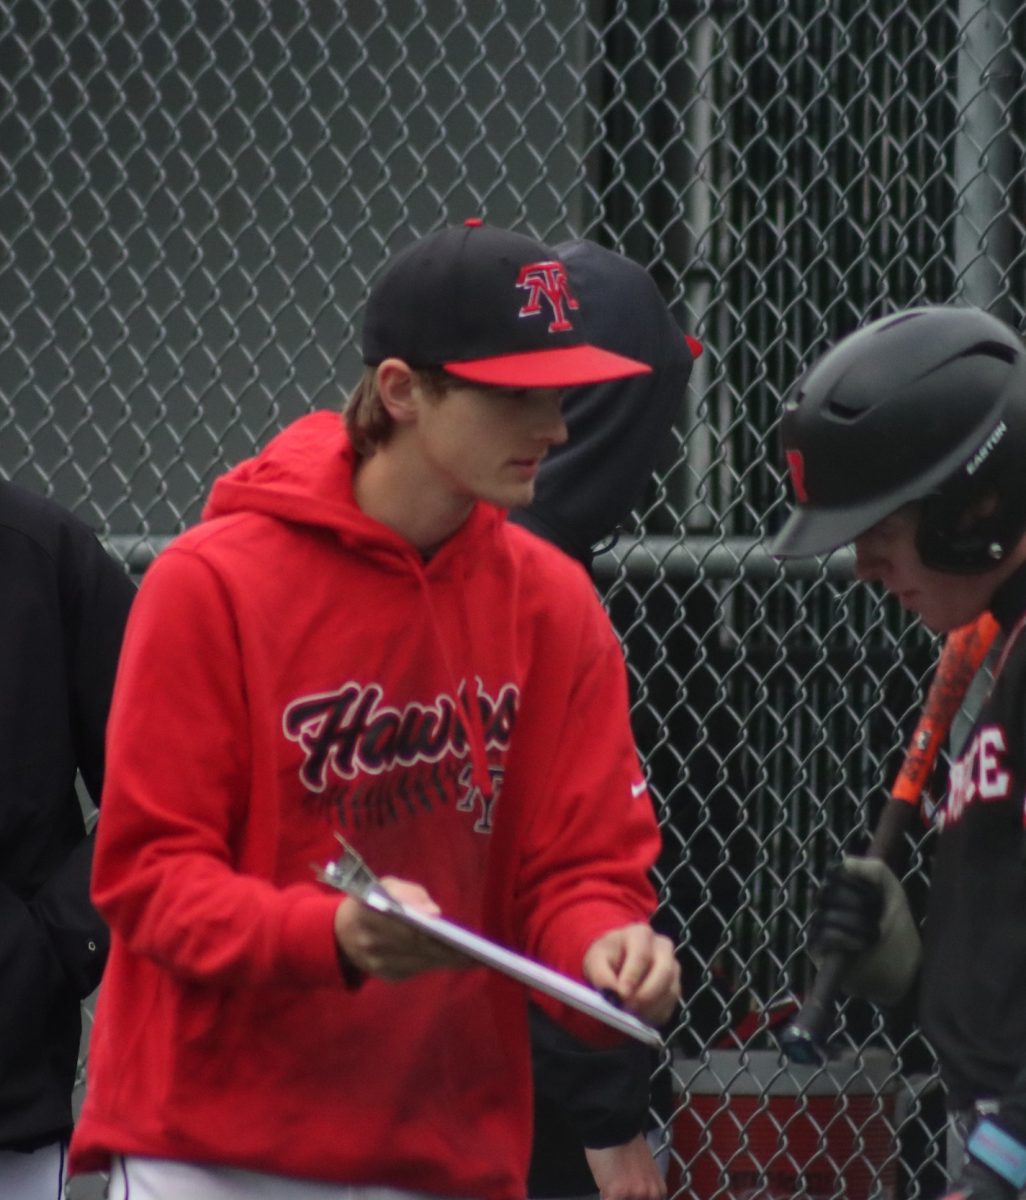 Ryan Sturgill explains to teammate Matthew Meadows the tendancy of the opposing pitcher so he would know how go about his next turn up to bat. 